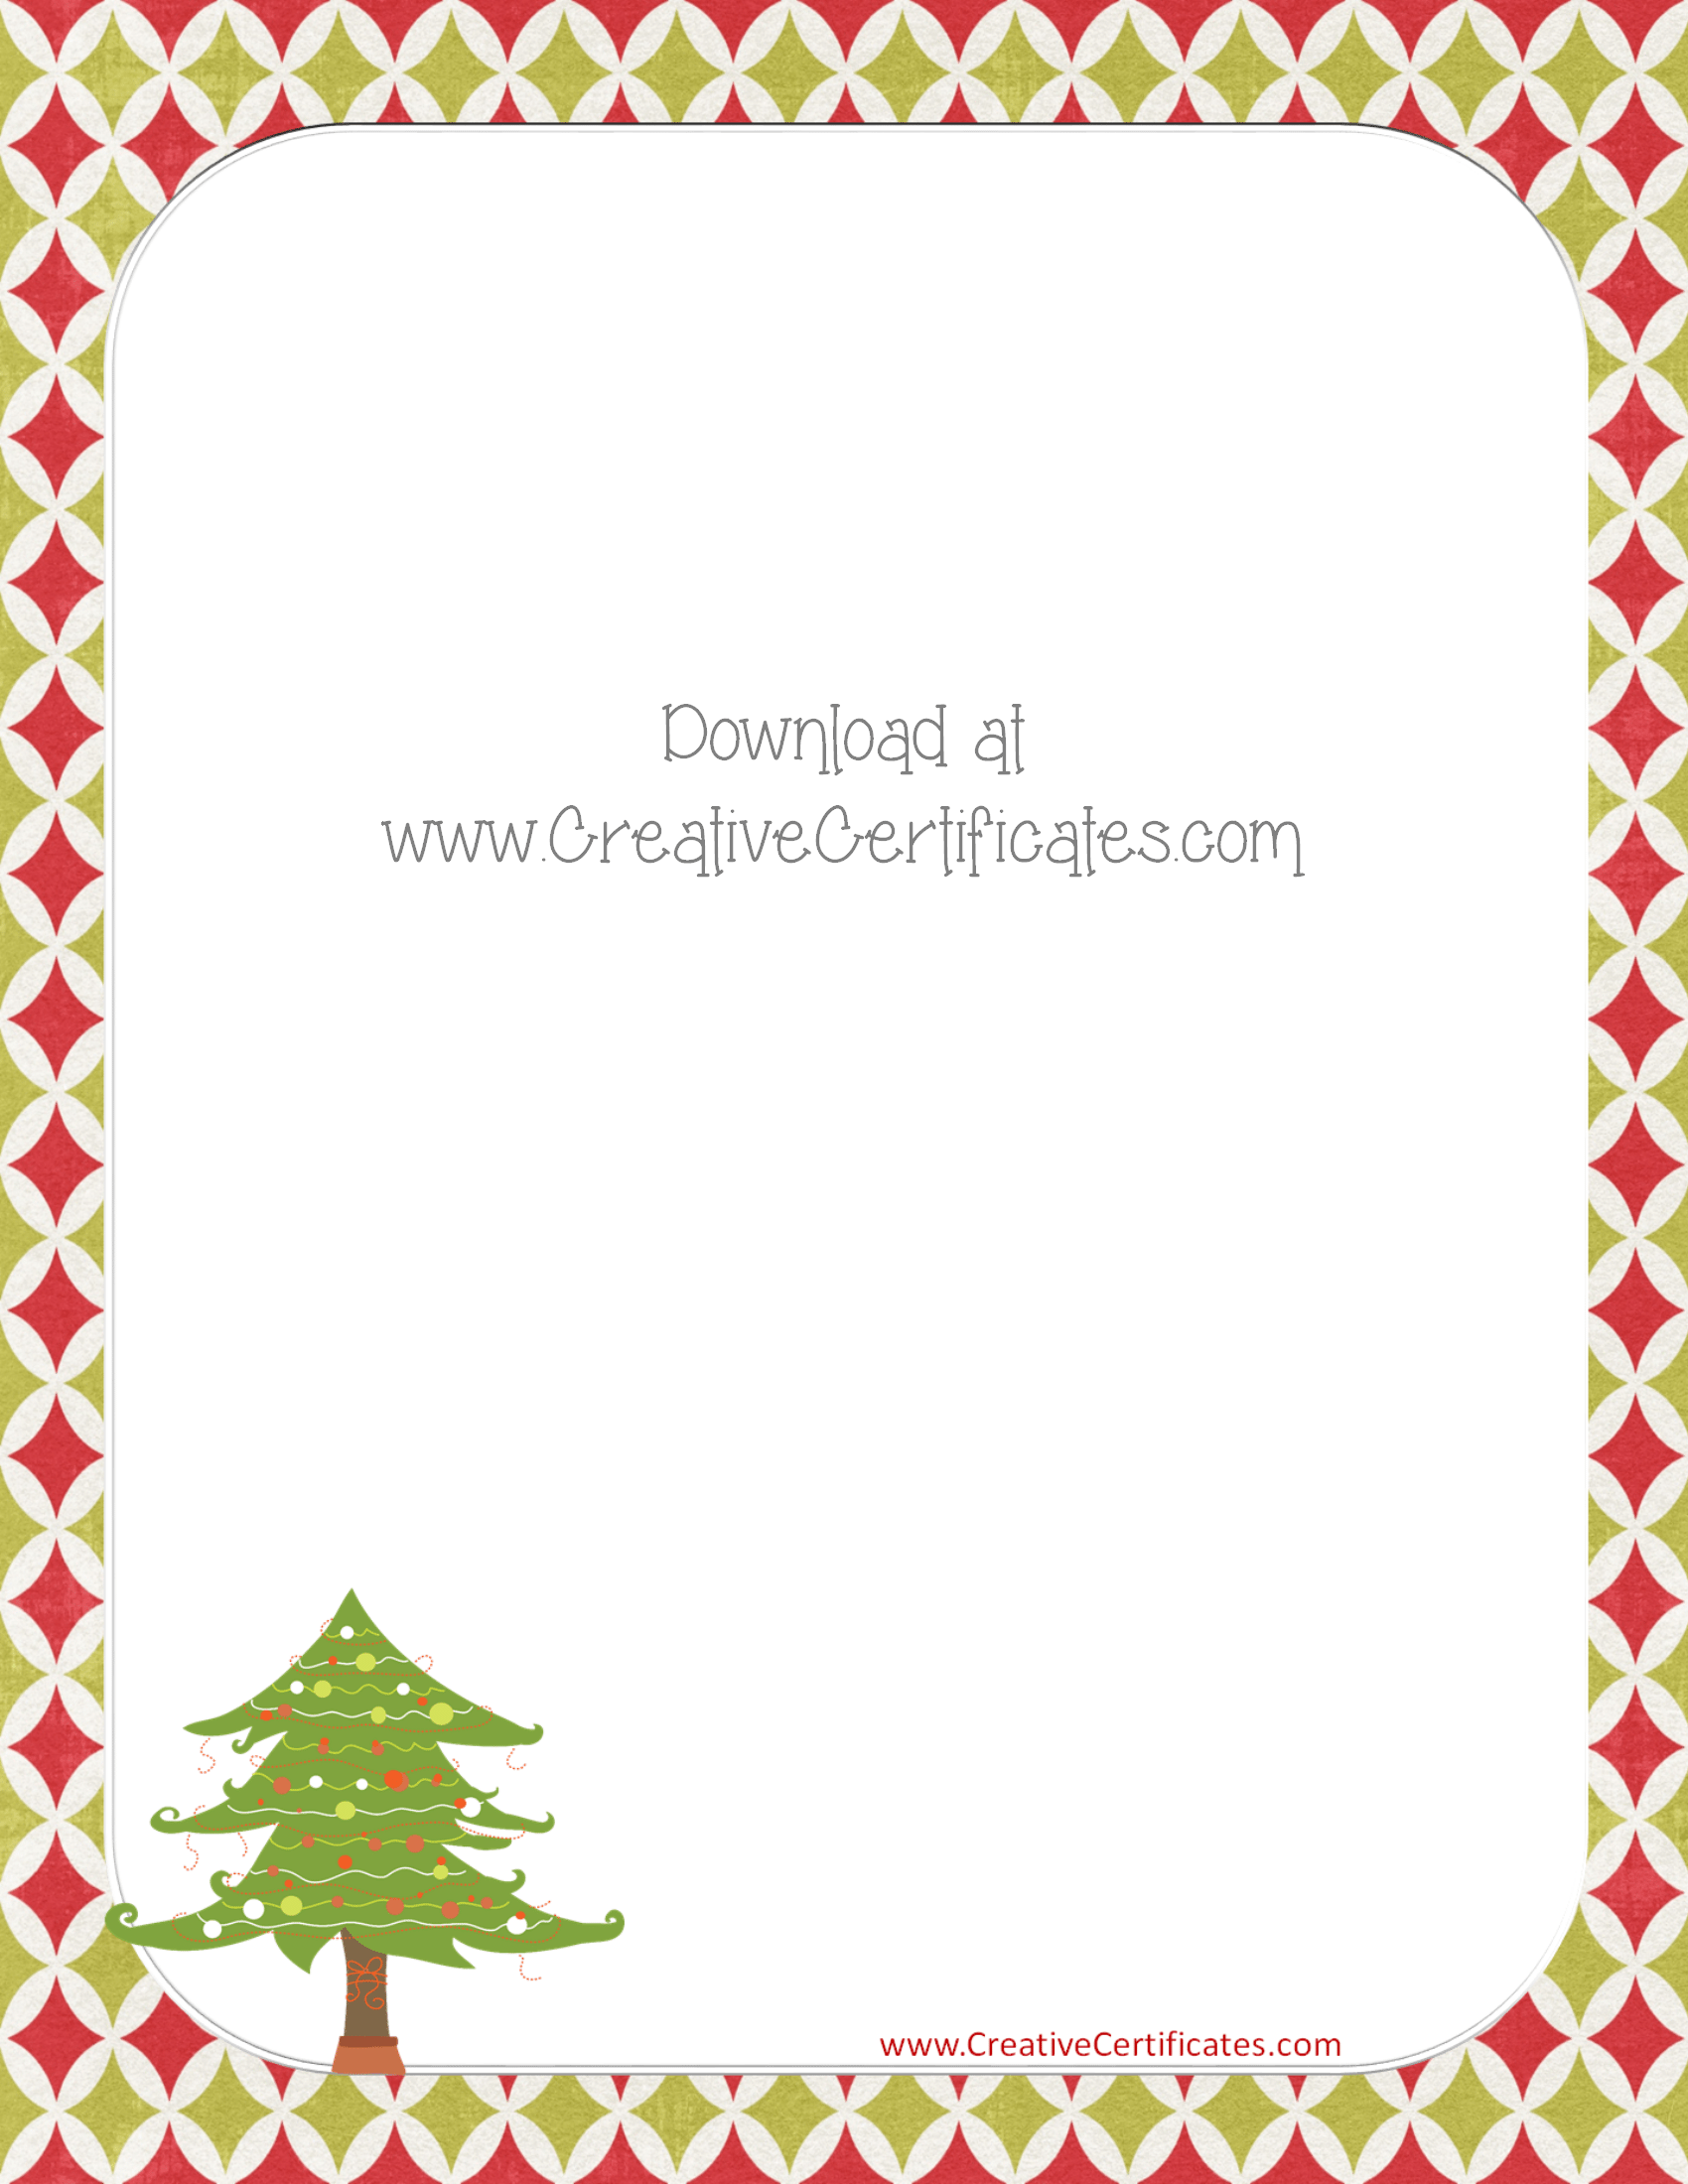 Free Christmas Border Templates Customize Online then Download